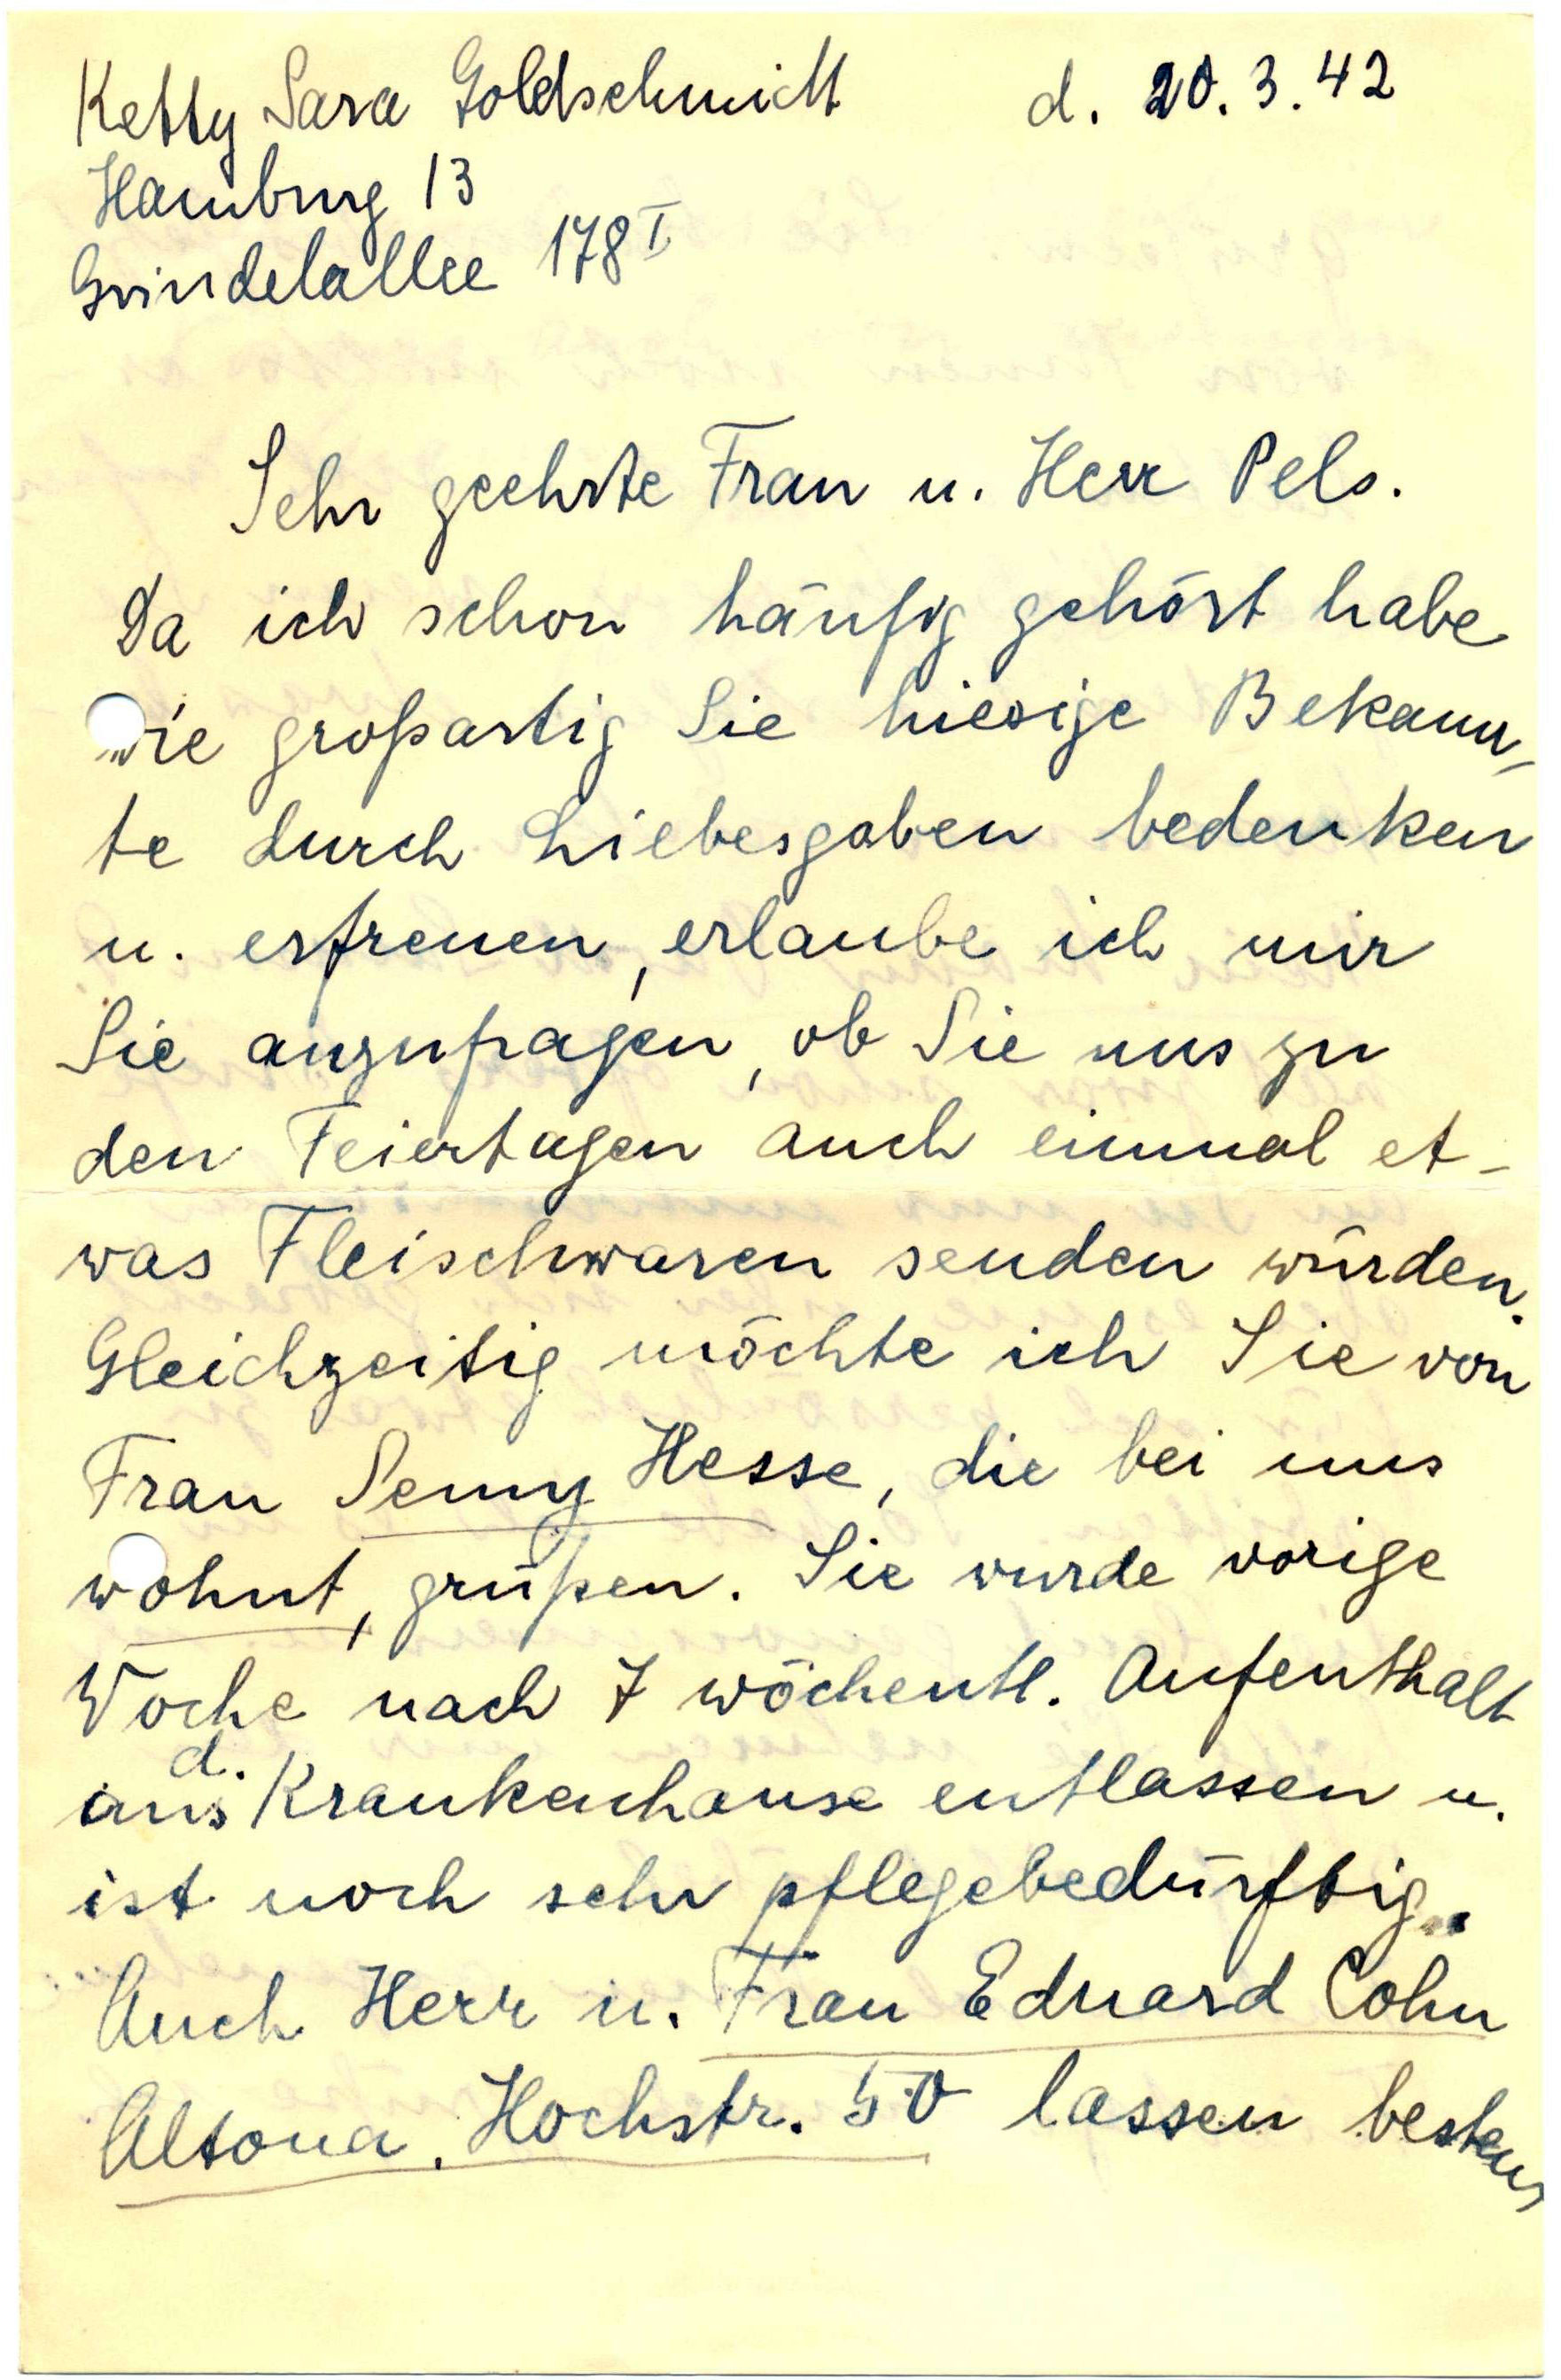 Letters from Ketty Goldschmidt to Cecilia and Ludwig Pels